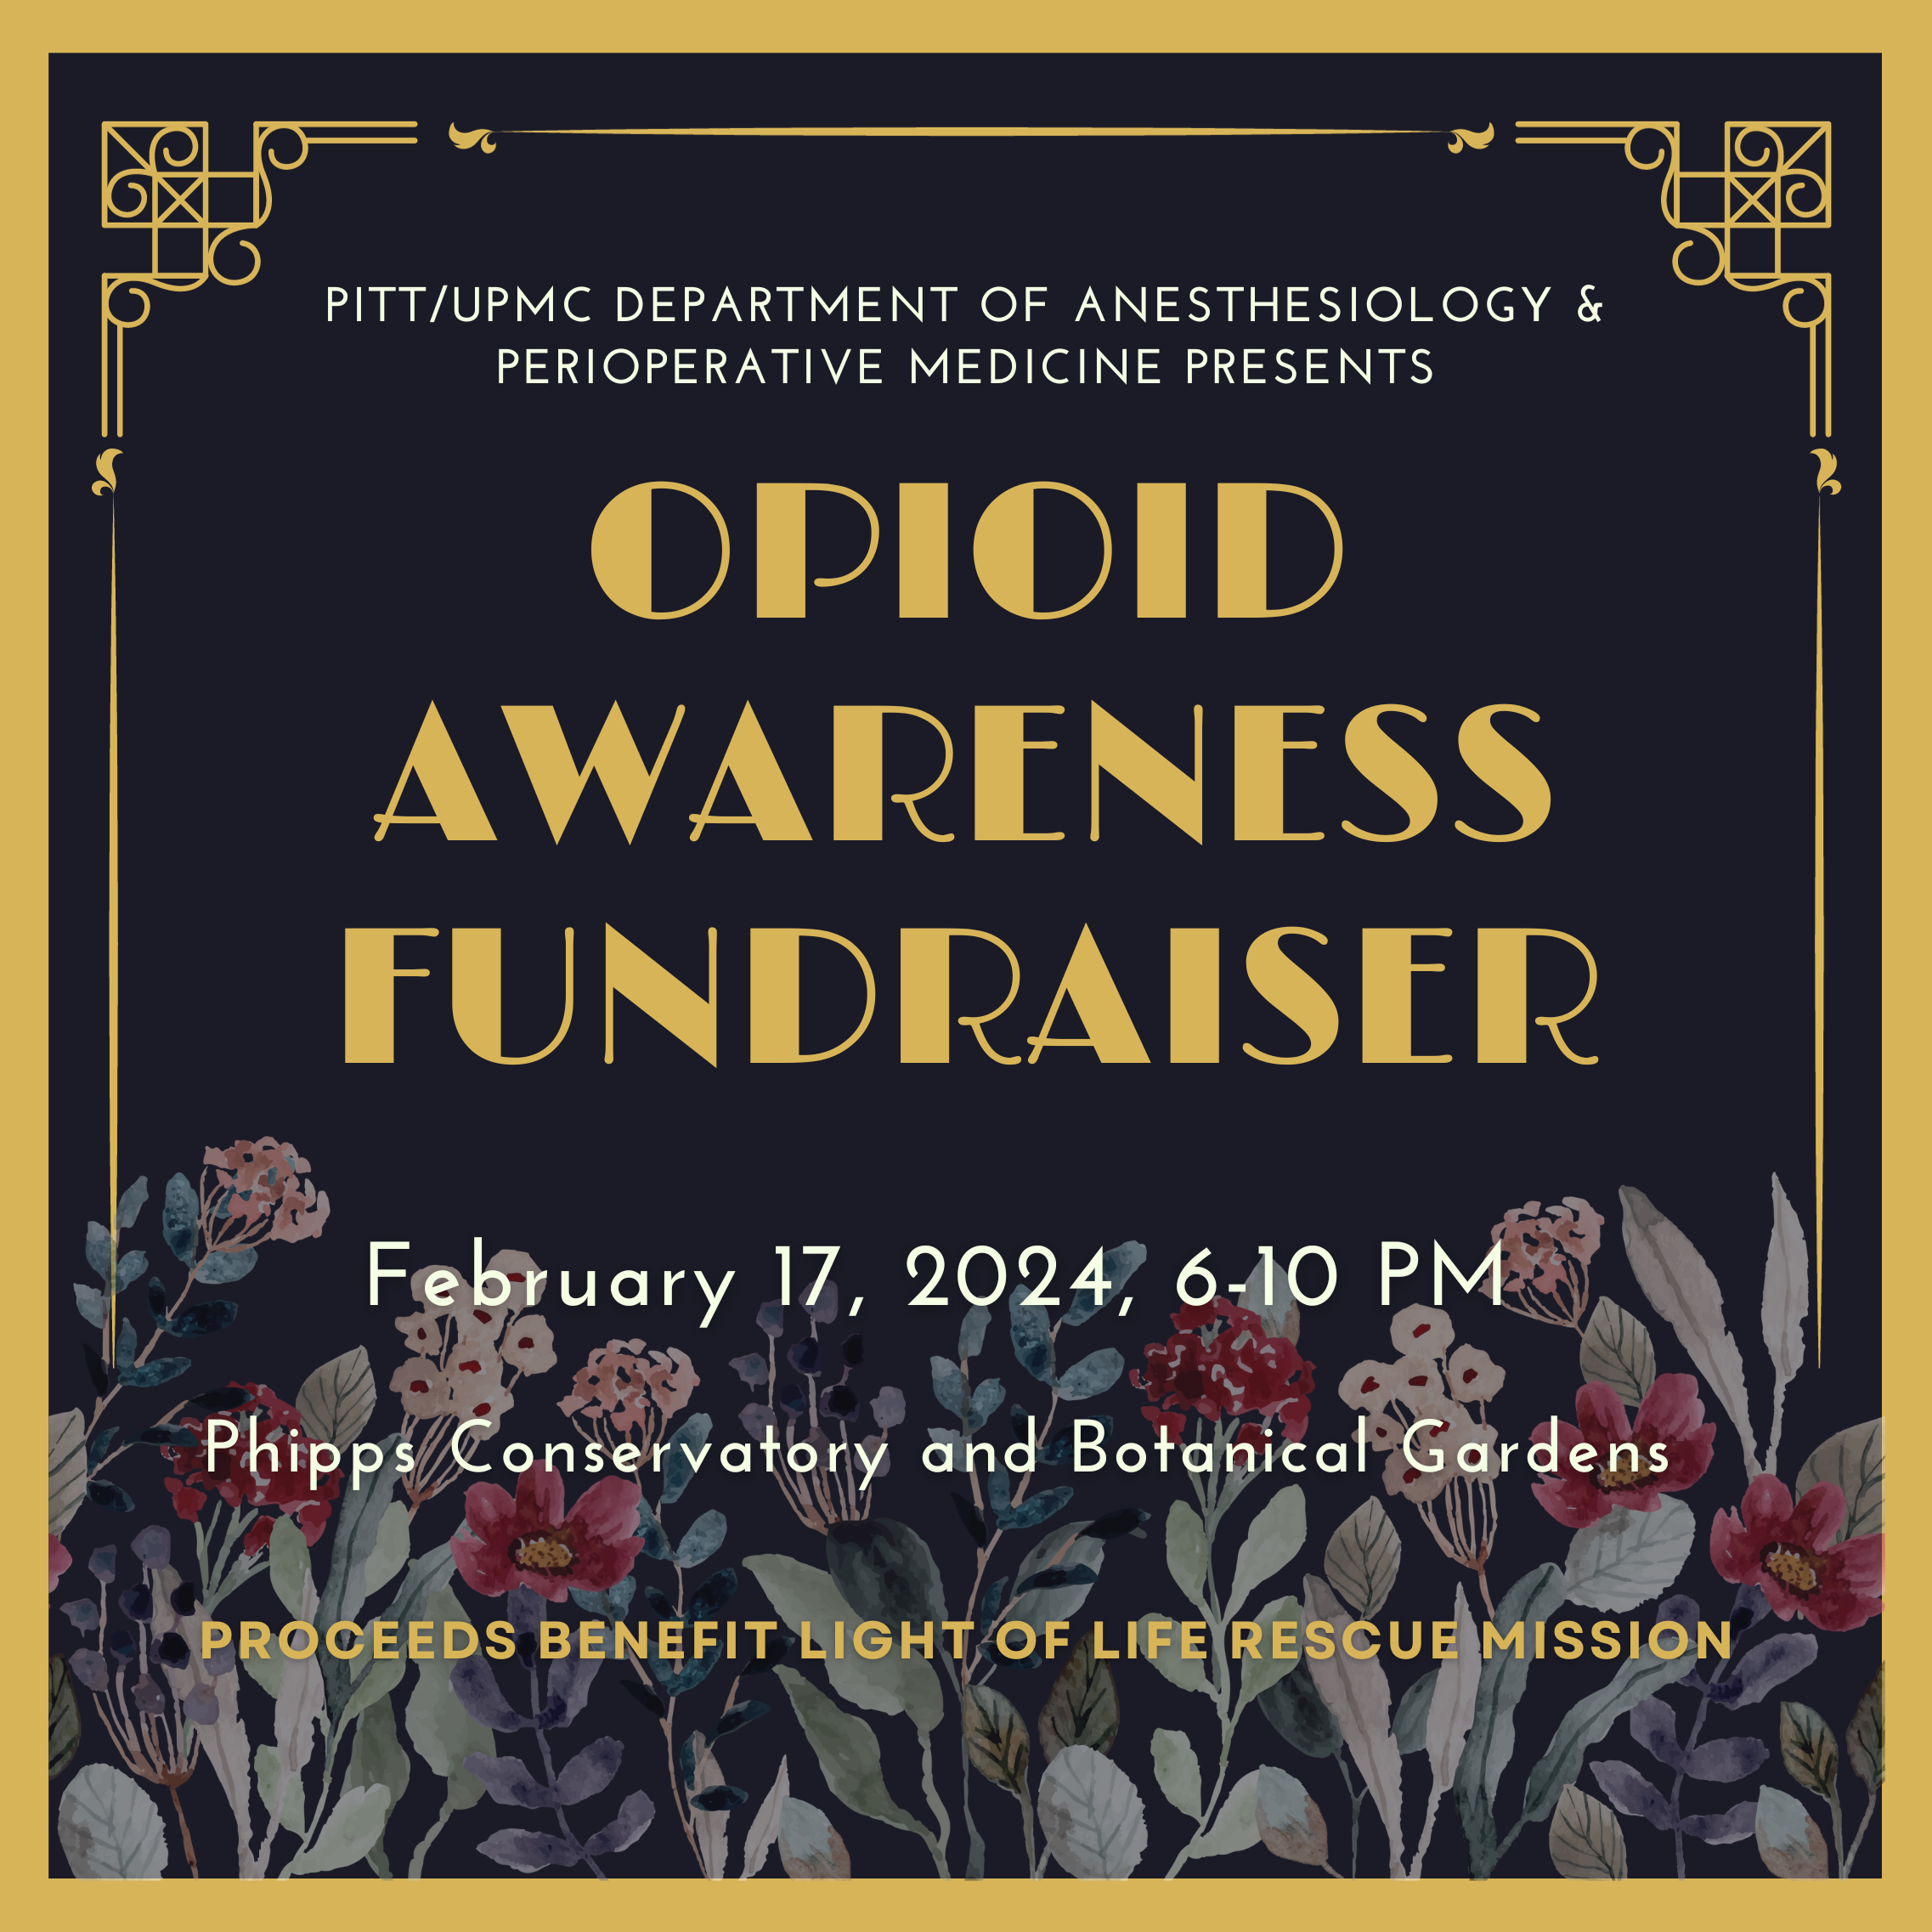 "A graphic advertising the Opioid awareness fundraiser"